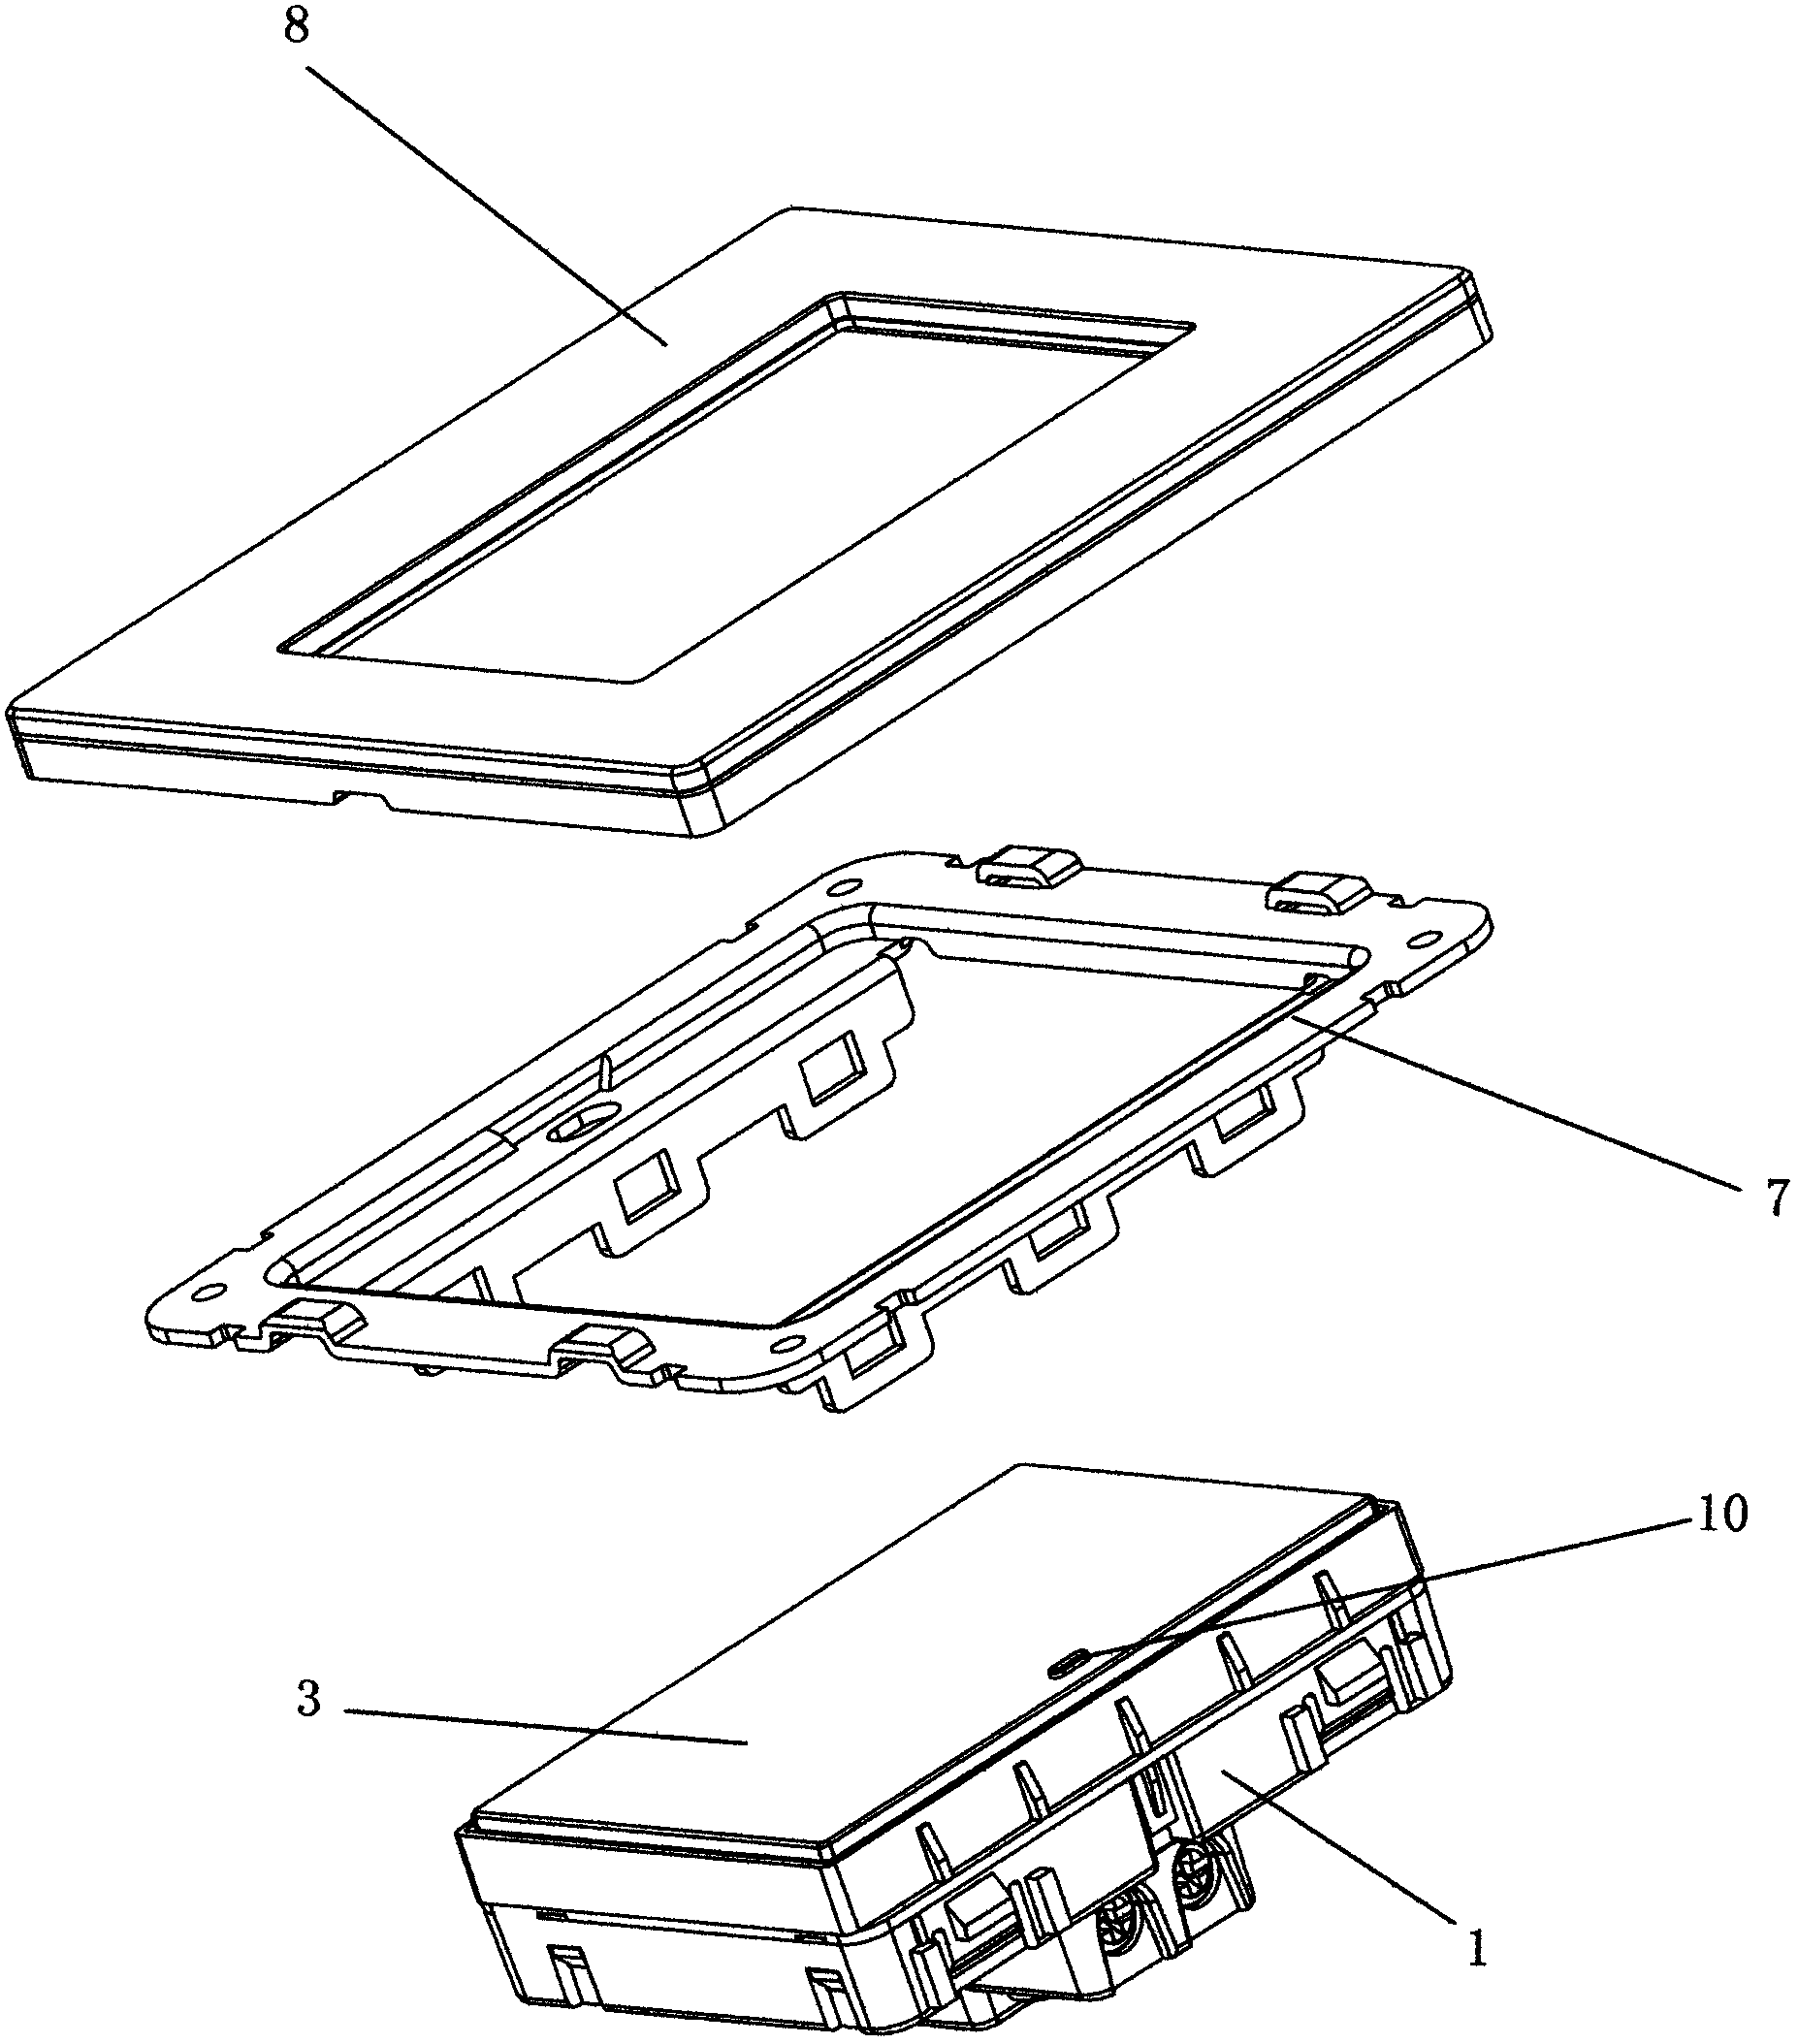 Arbitrary point-pressing panel switch